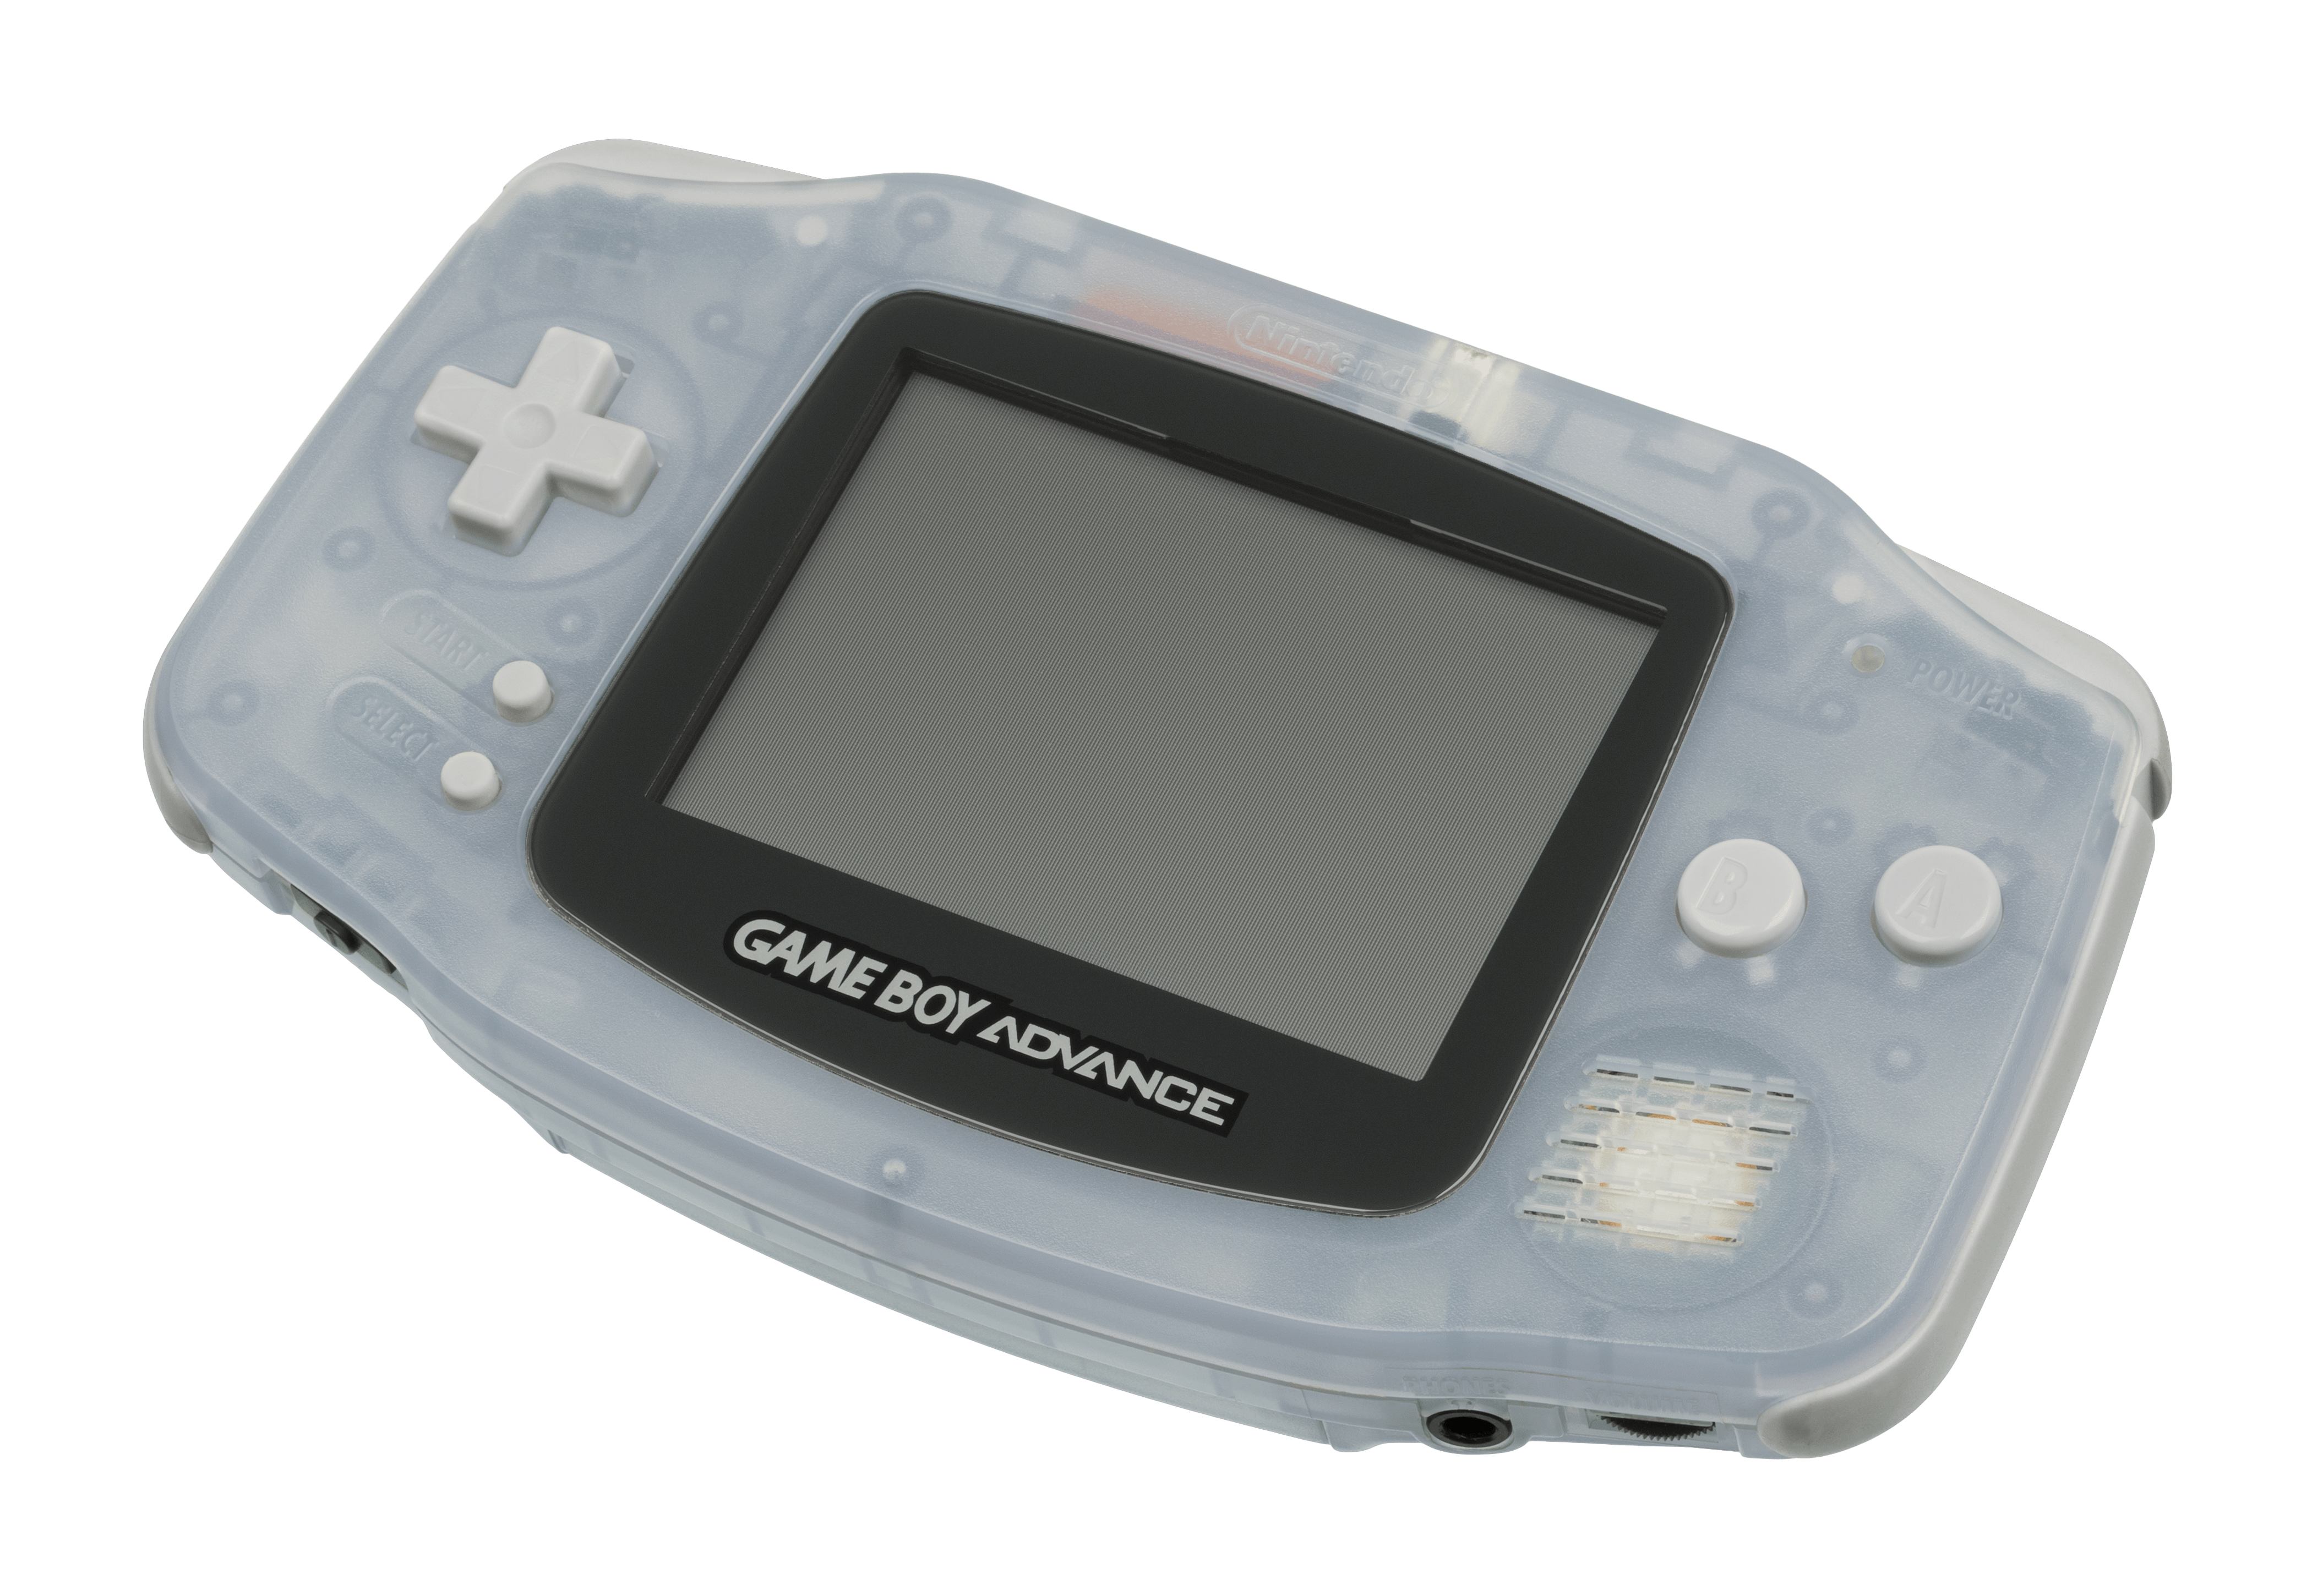 game clipart gameboy color